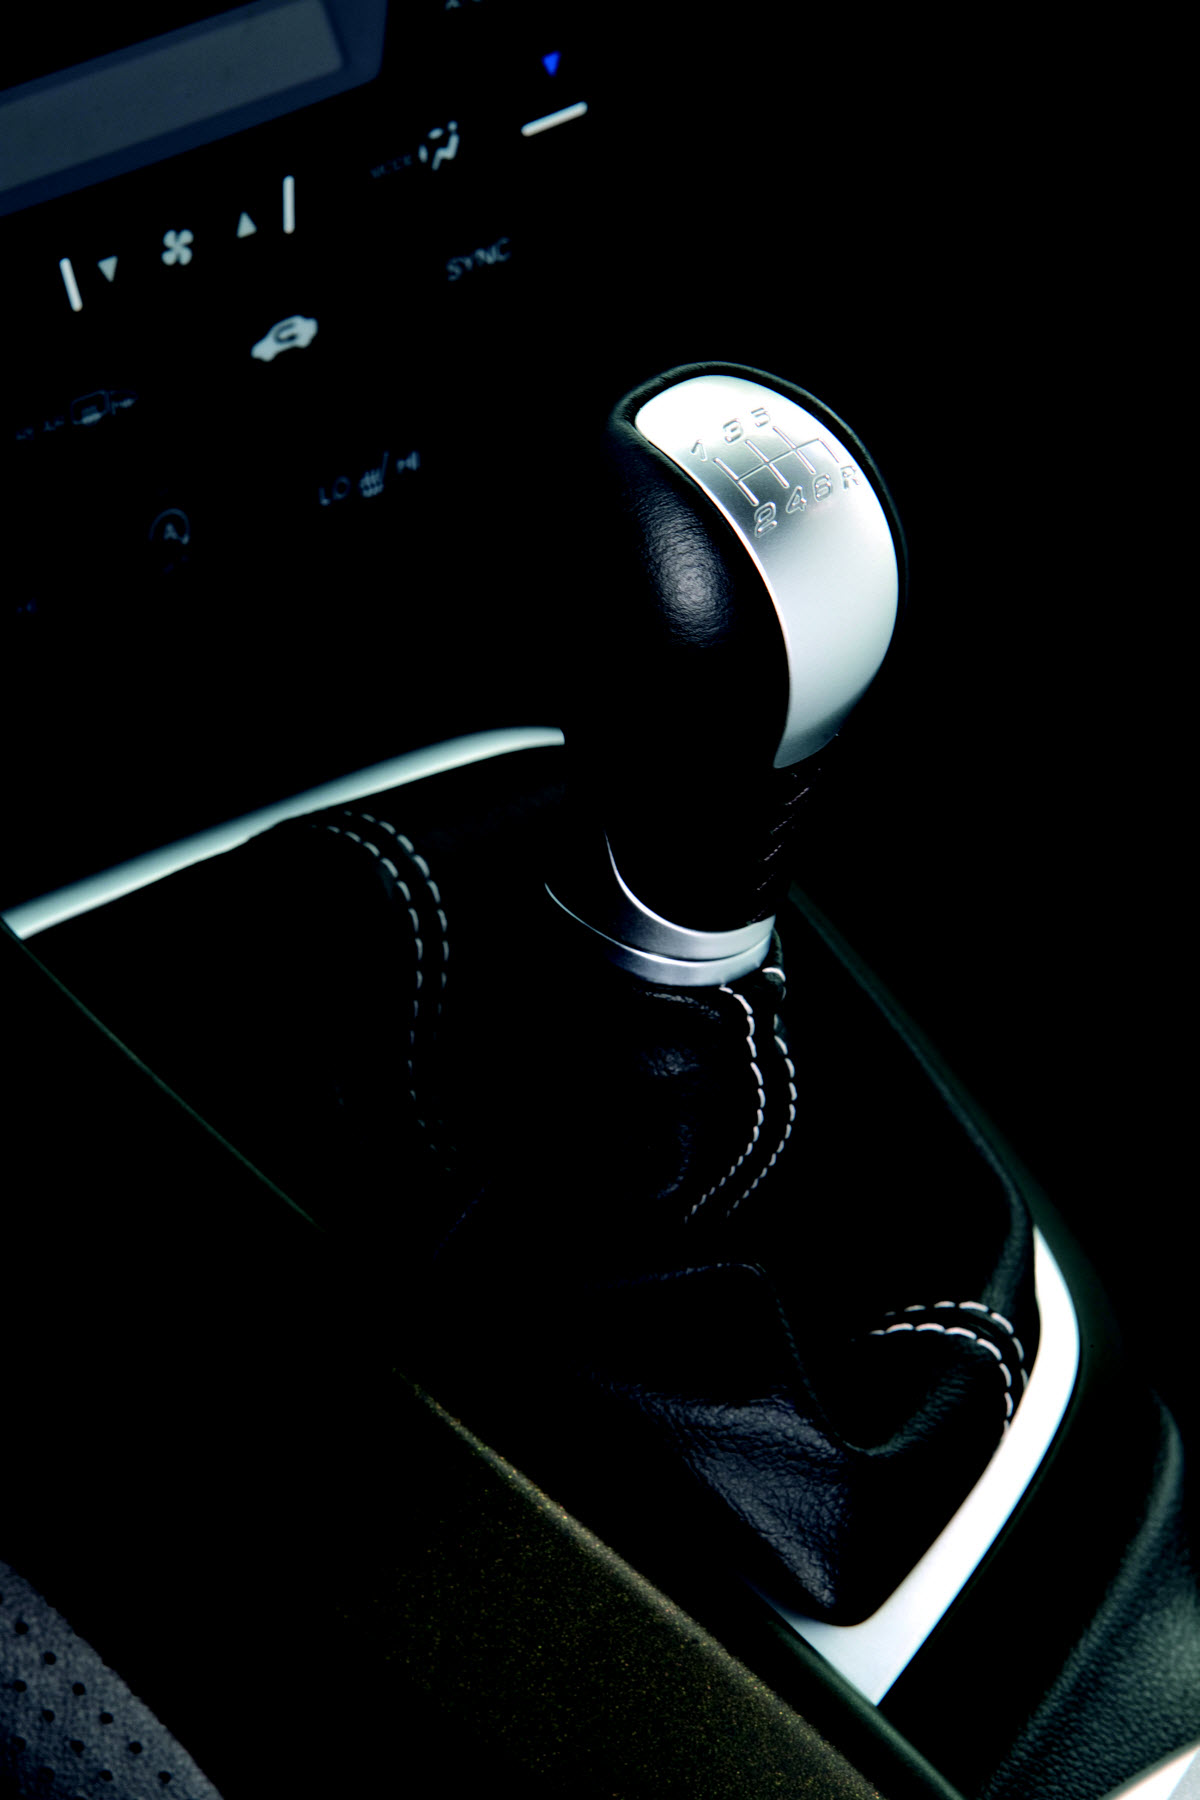 036 CIVIC GEARSHIFT EDT